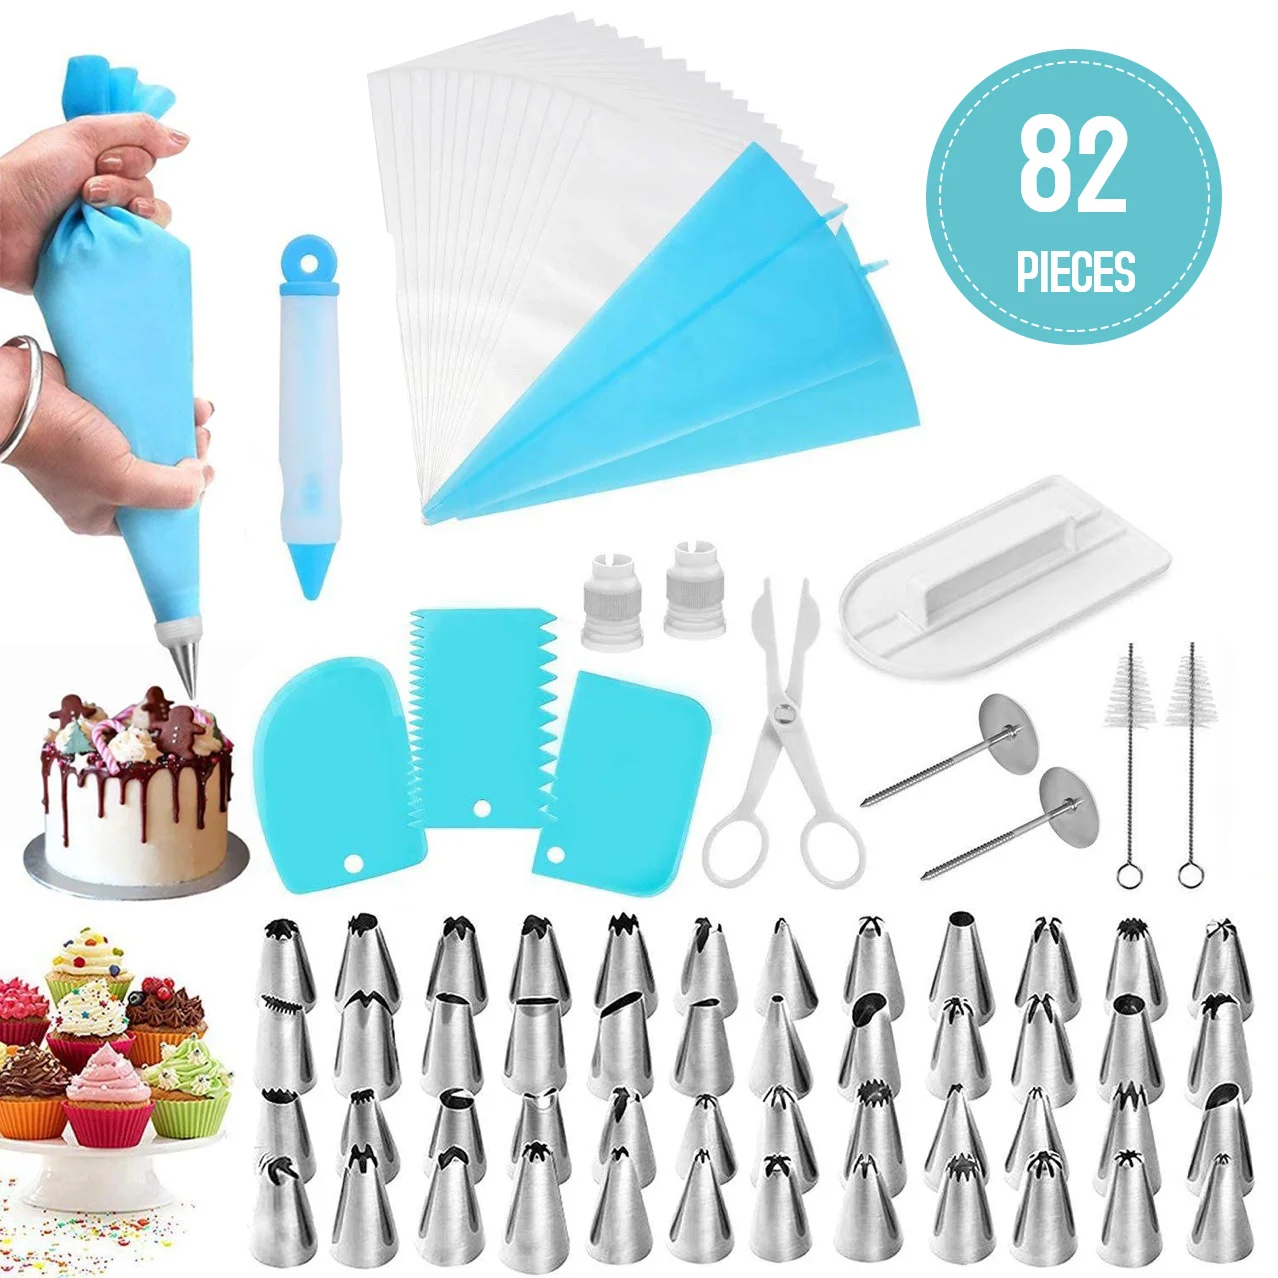 Relish Your Cake Decorating Ideas with Essential Cake Decorating Items